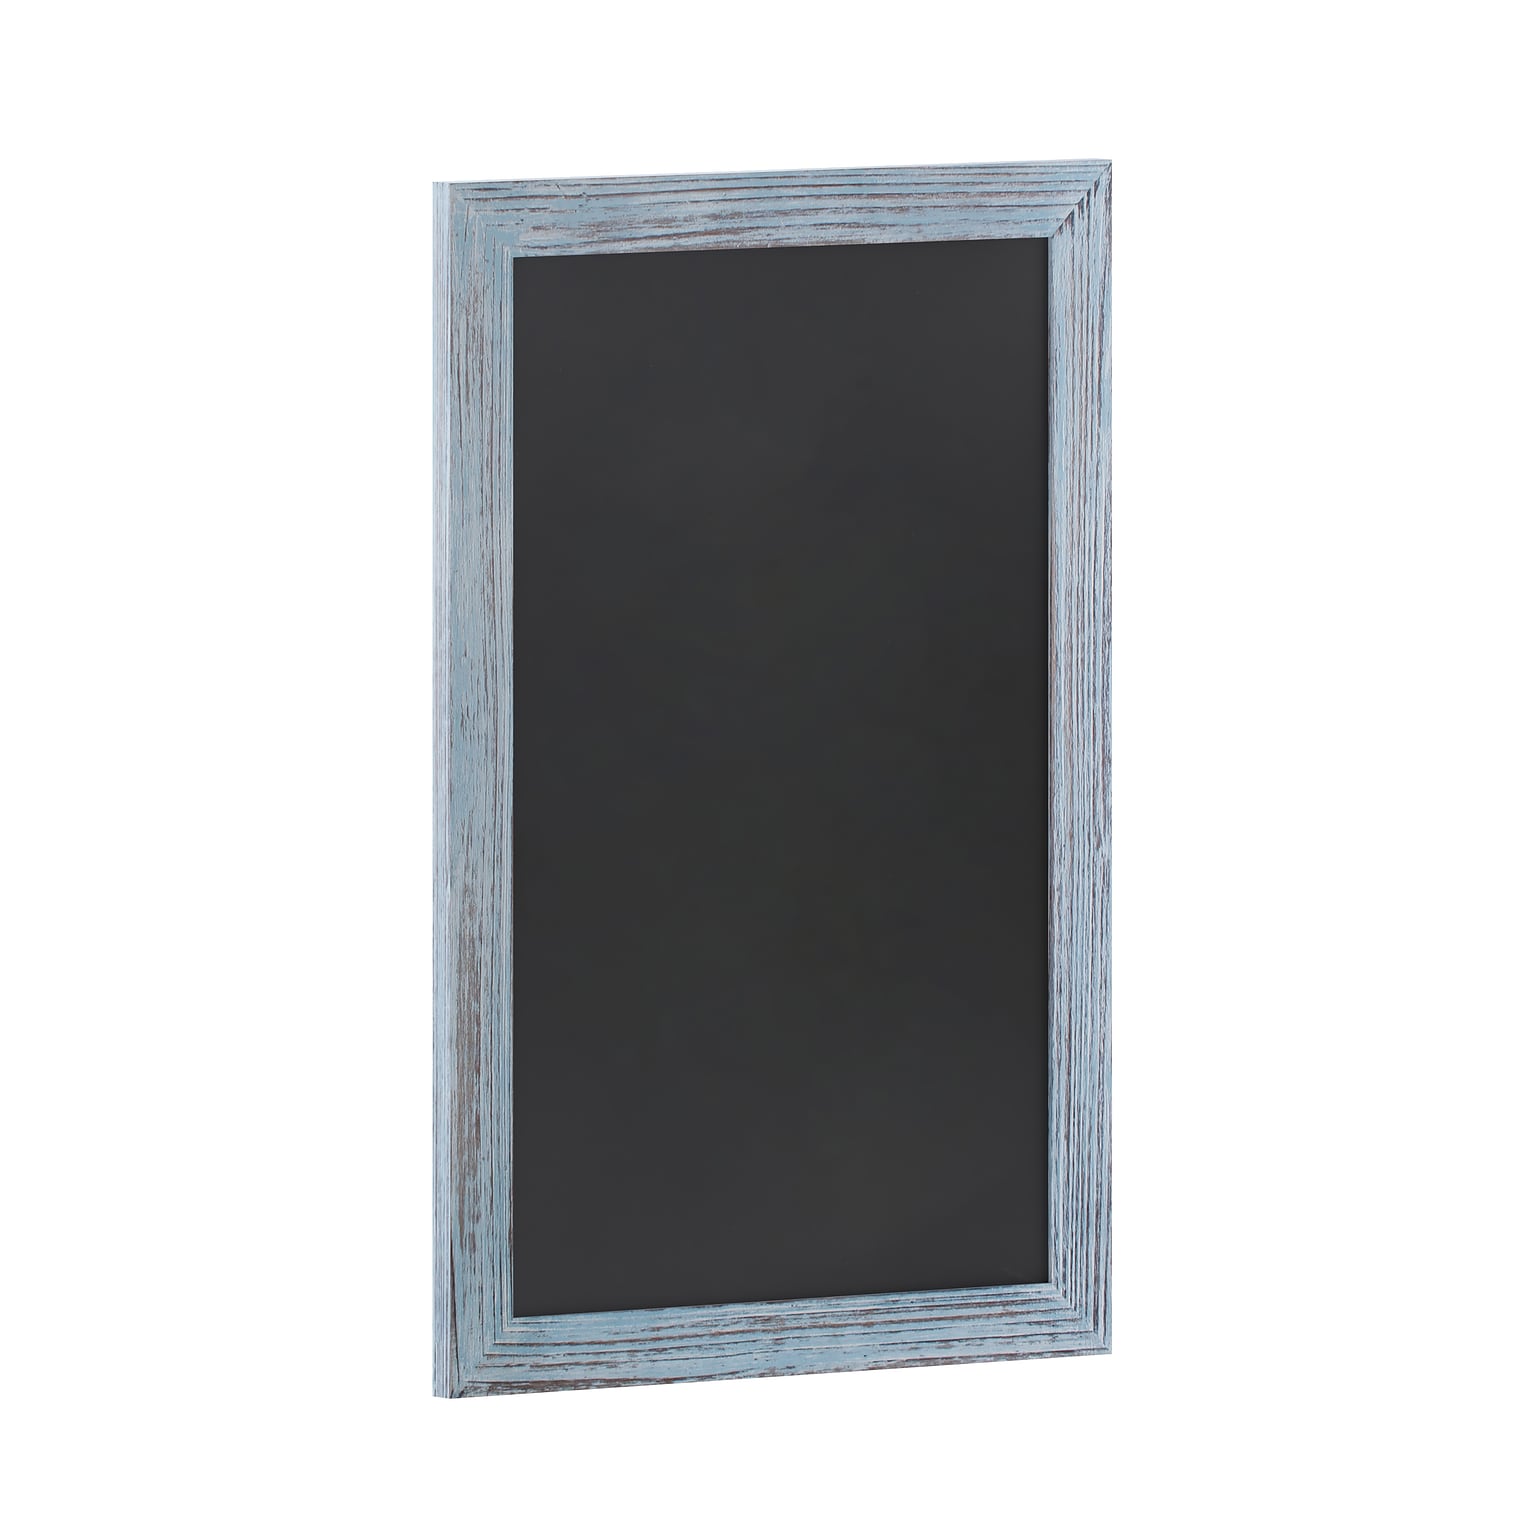 Flash Furniture Canterbury Wall Mount Magnetic Chalkboard Sign, Rustic Blue, 20 x 30 (HGWAGDIS262315)